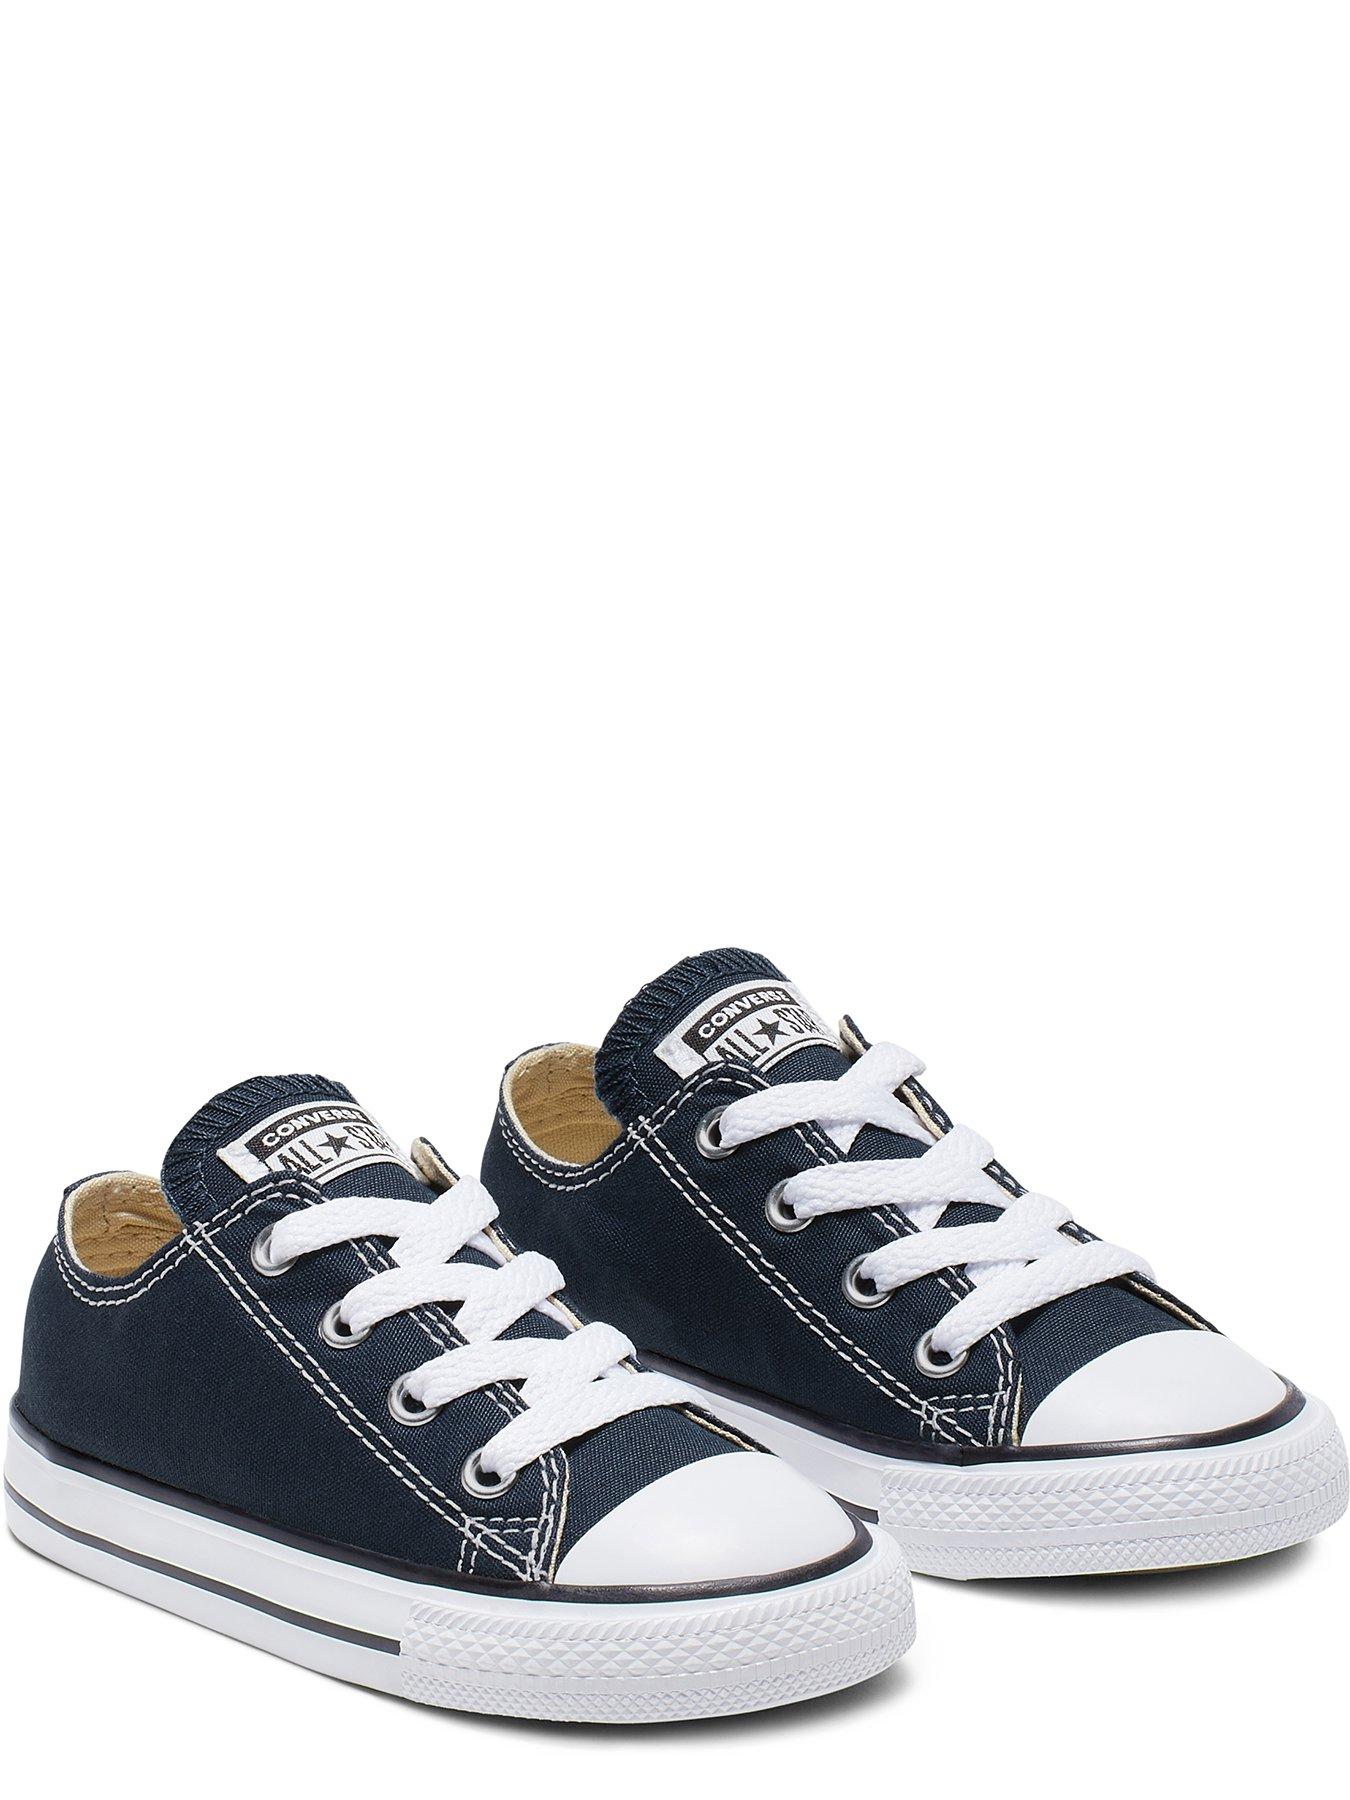 Converse Chuck Taylor All Star Unisex Trainers -Navy | very.co.uk